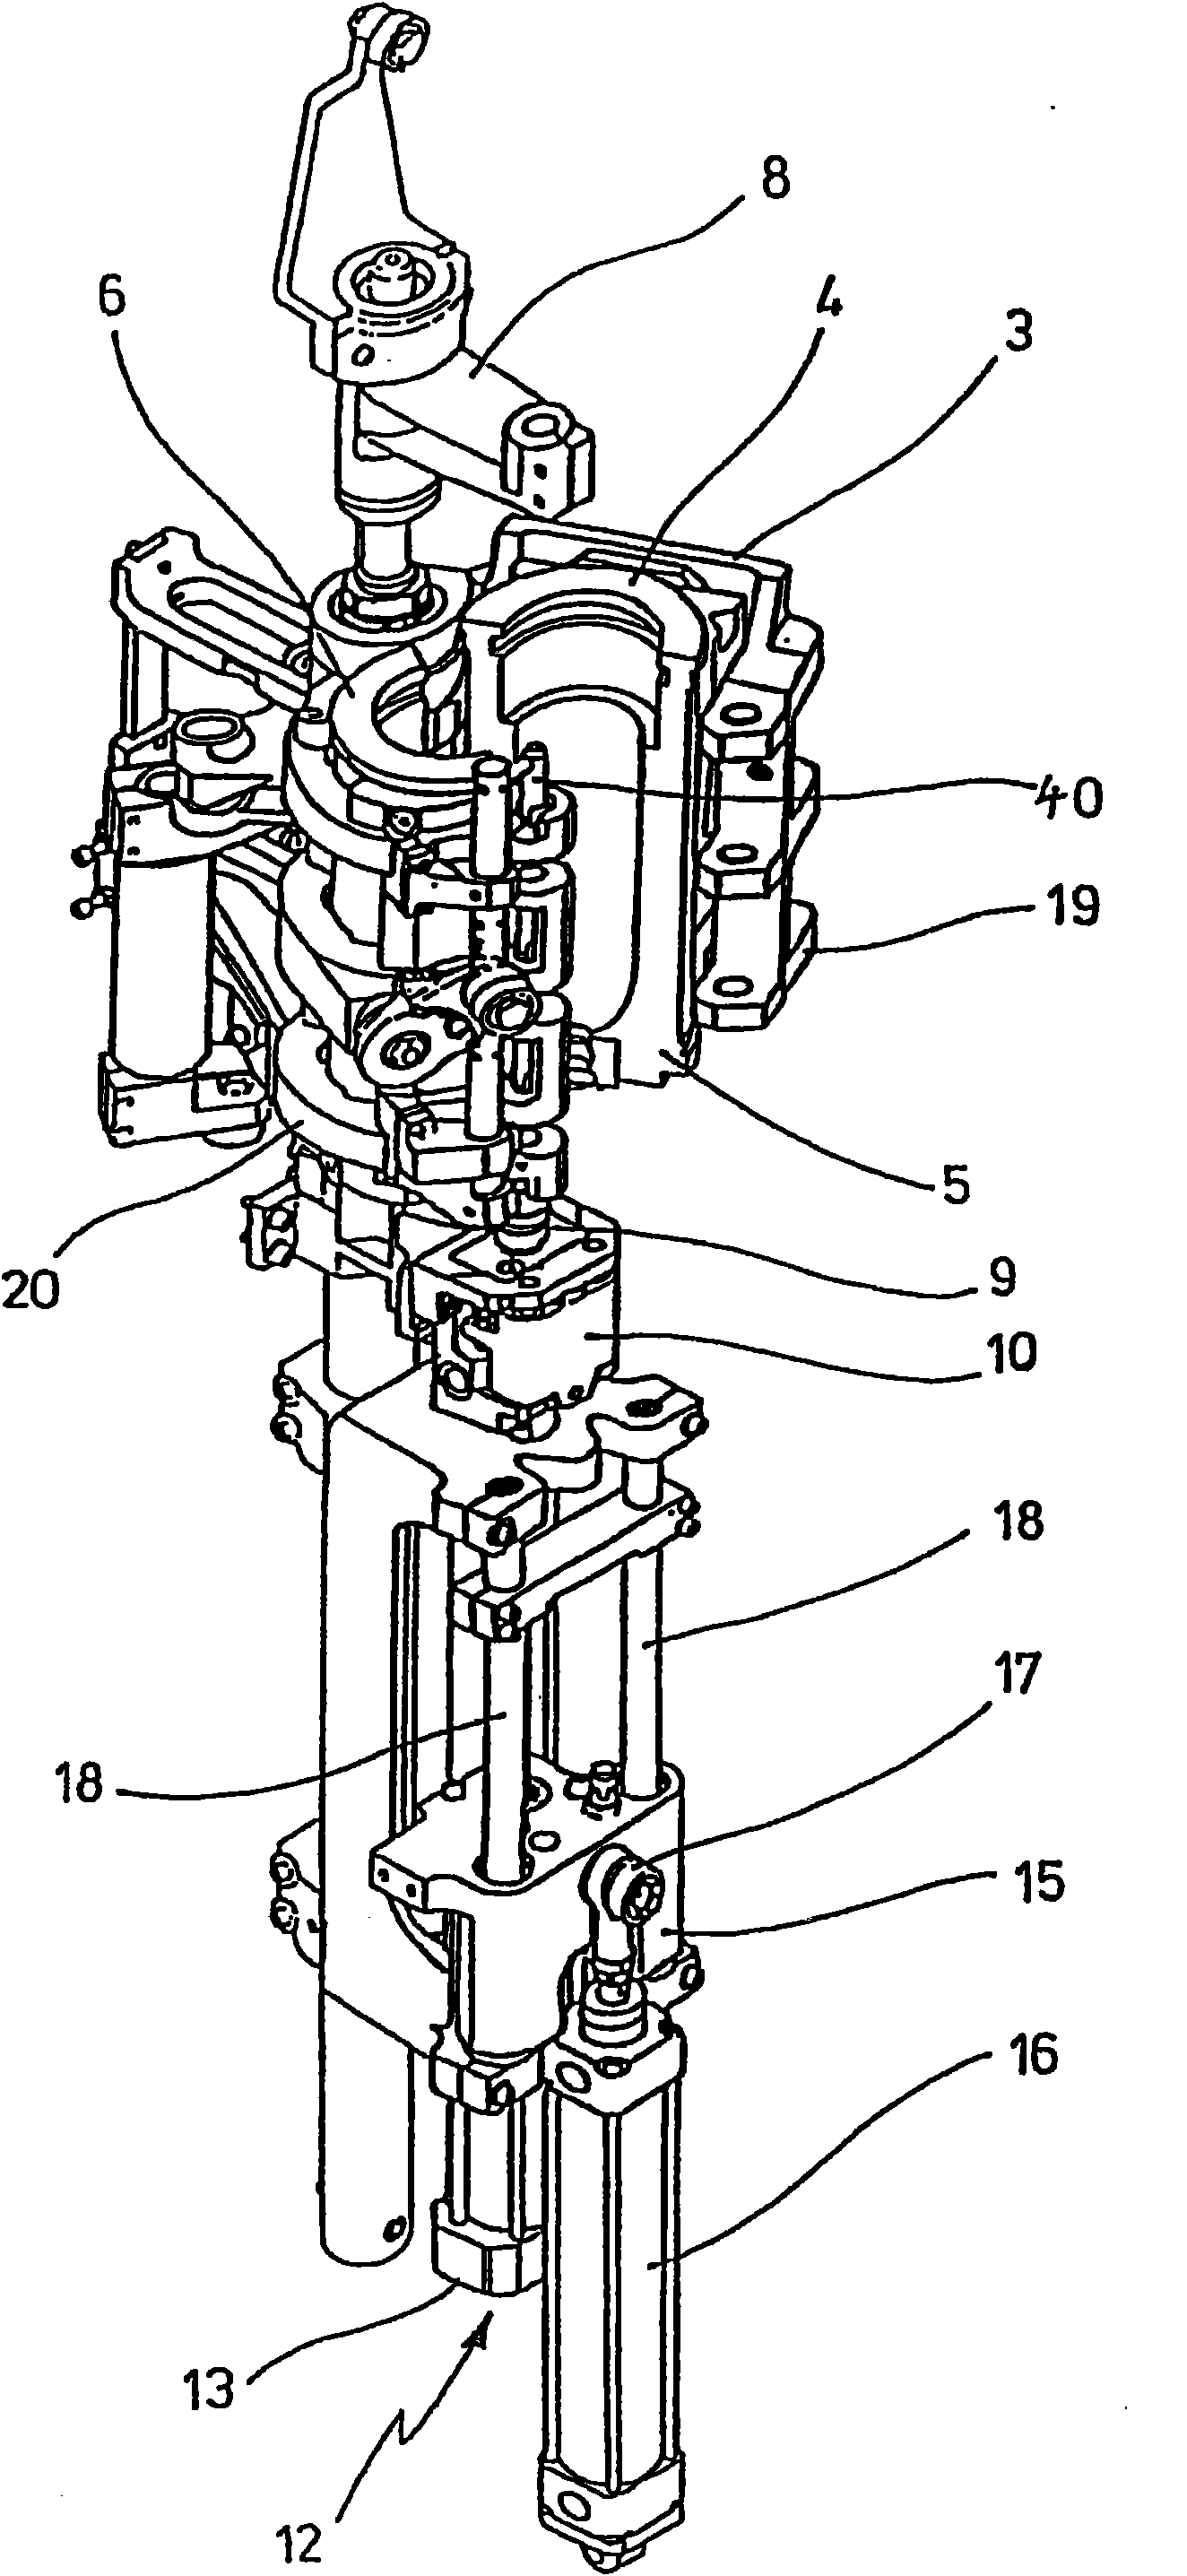 Device for blow-moulding containers